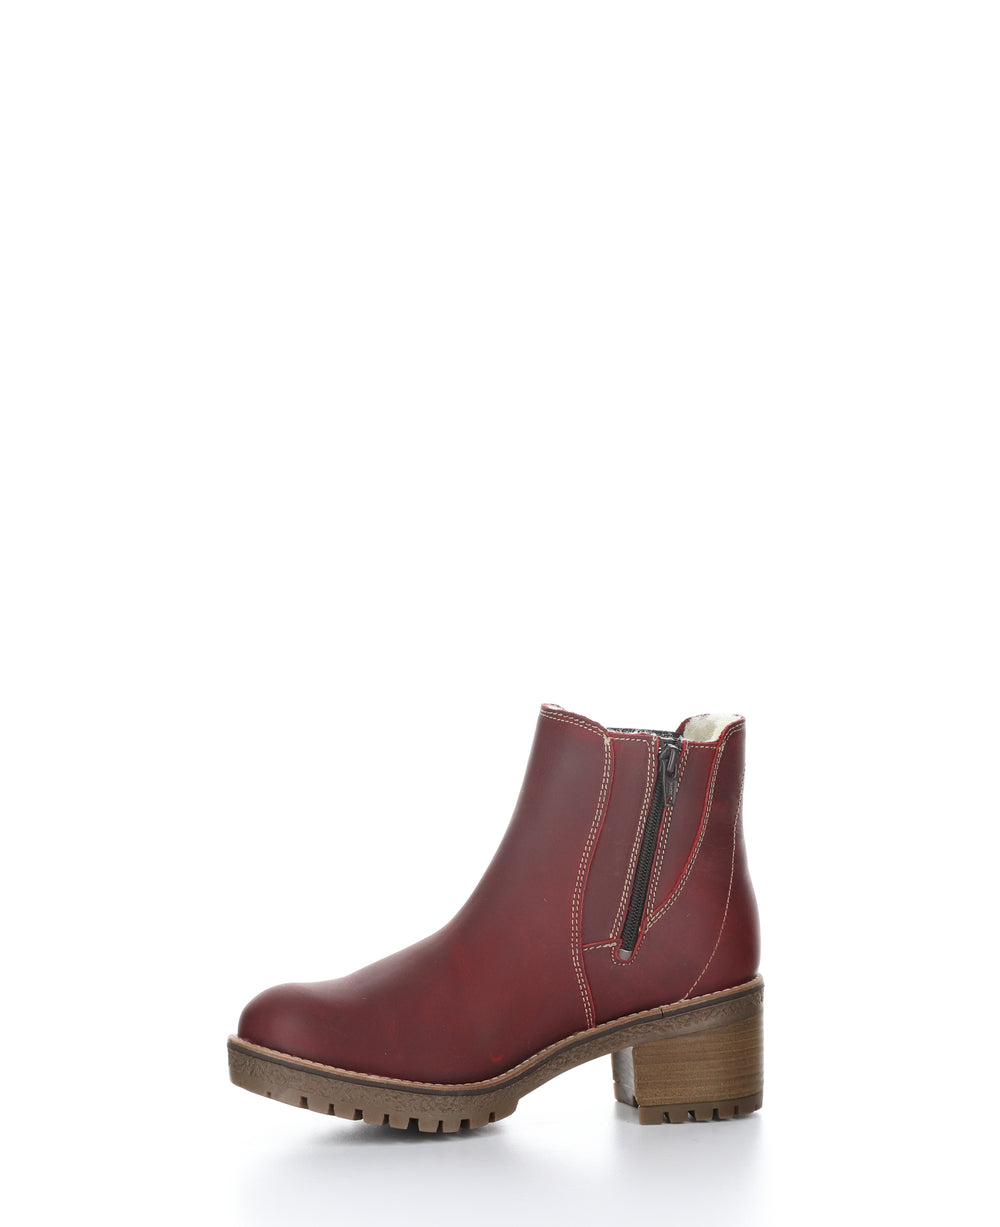 MASI Red/Dark Brown Zip Up Ankle Boots